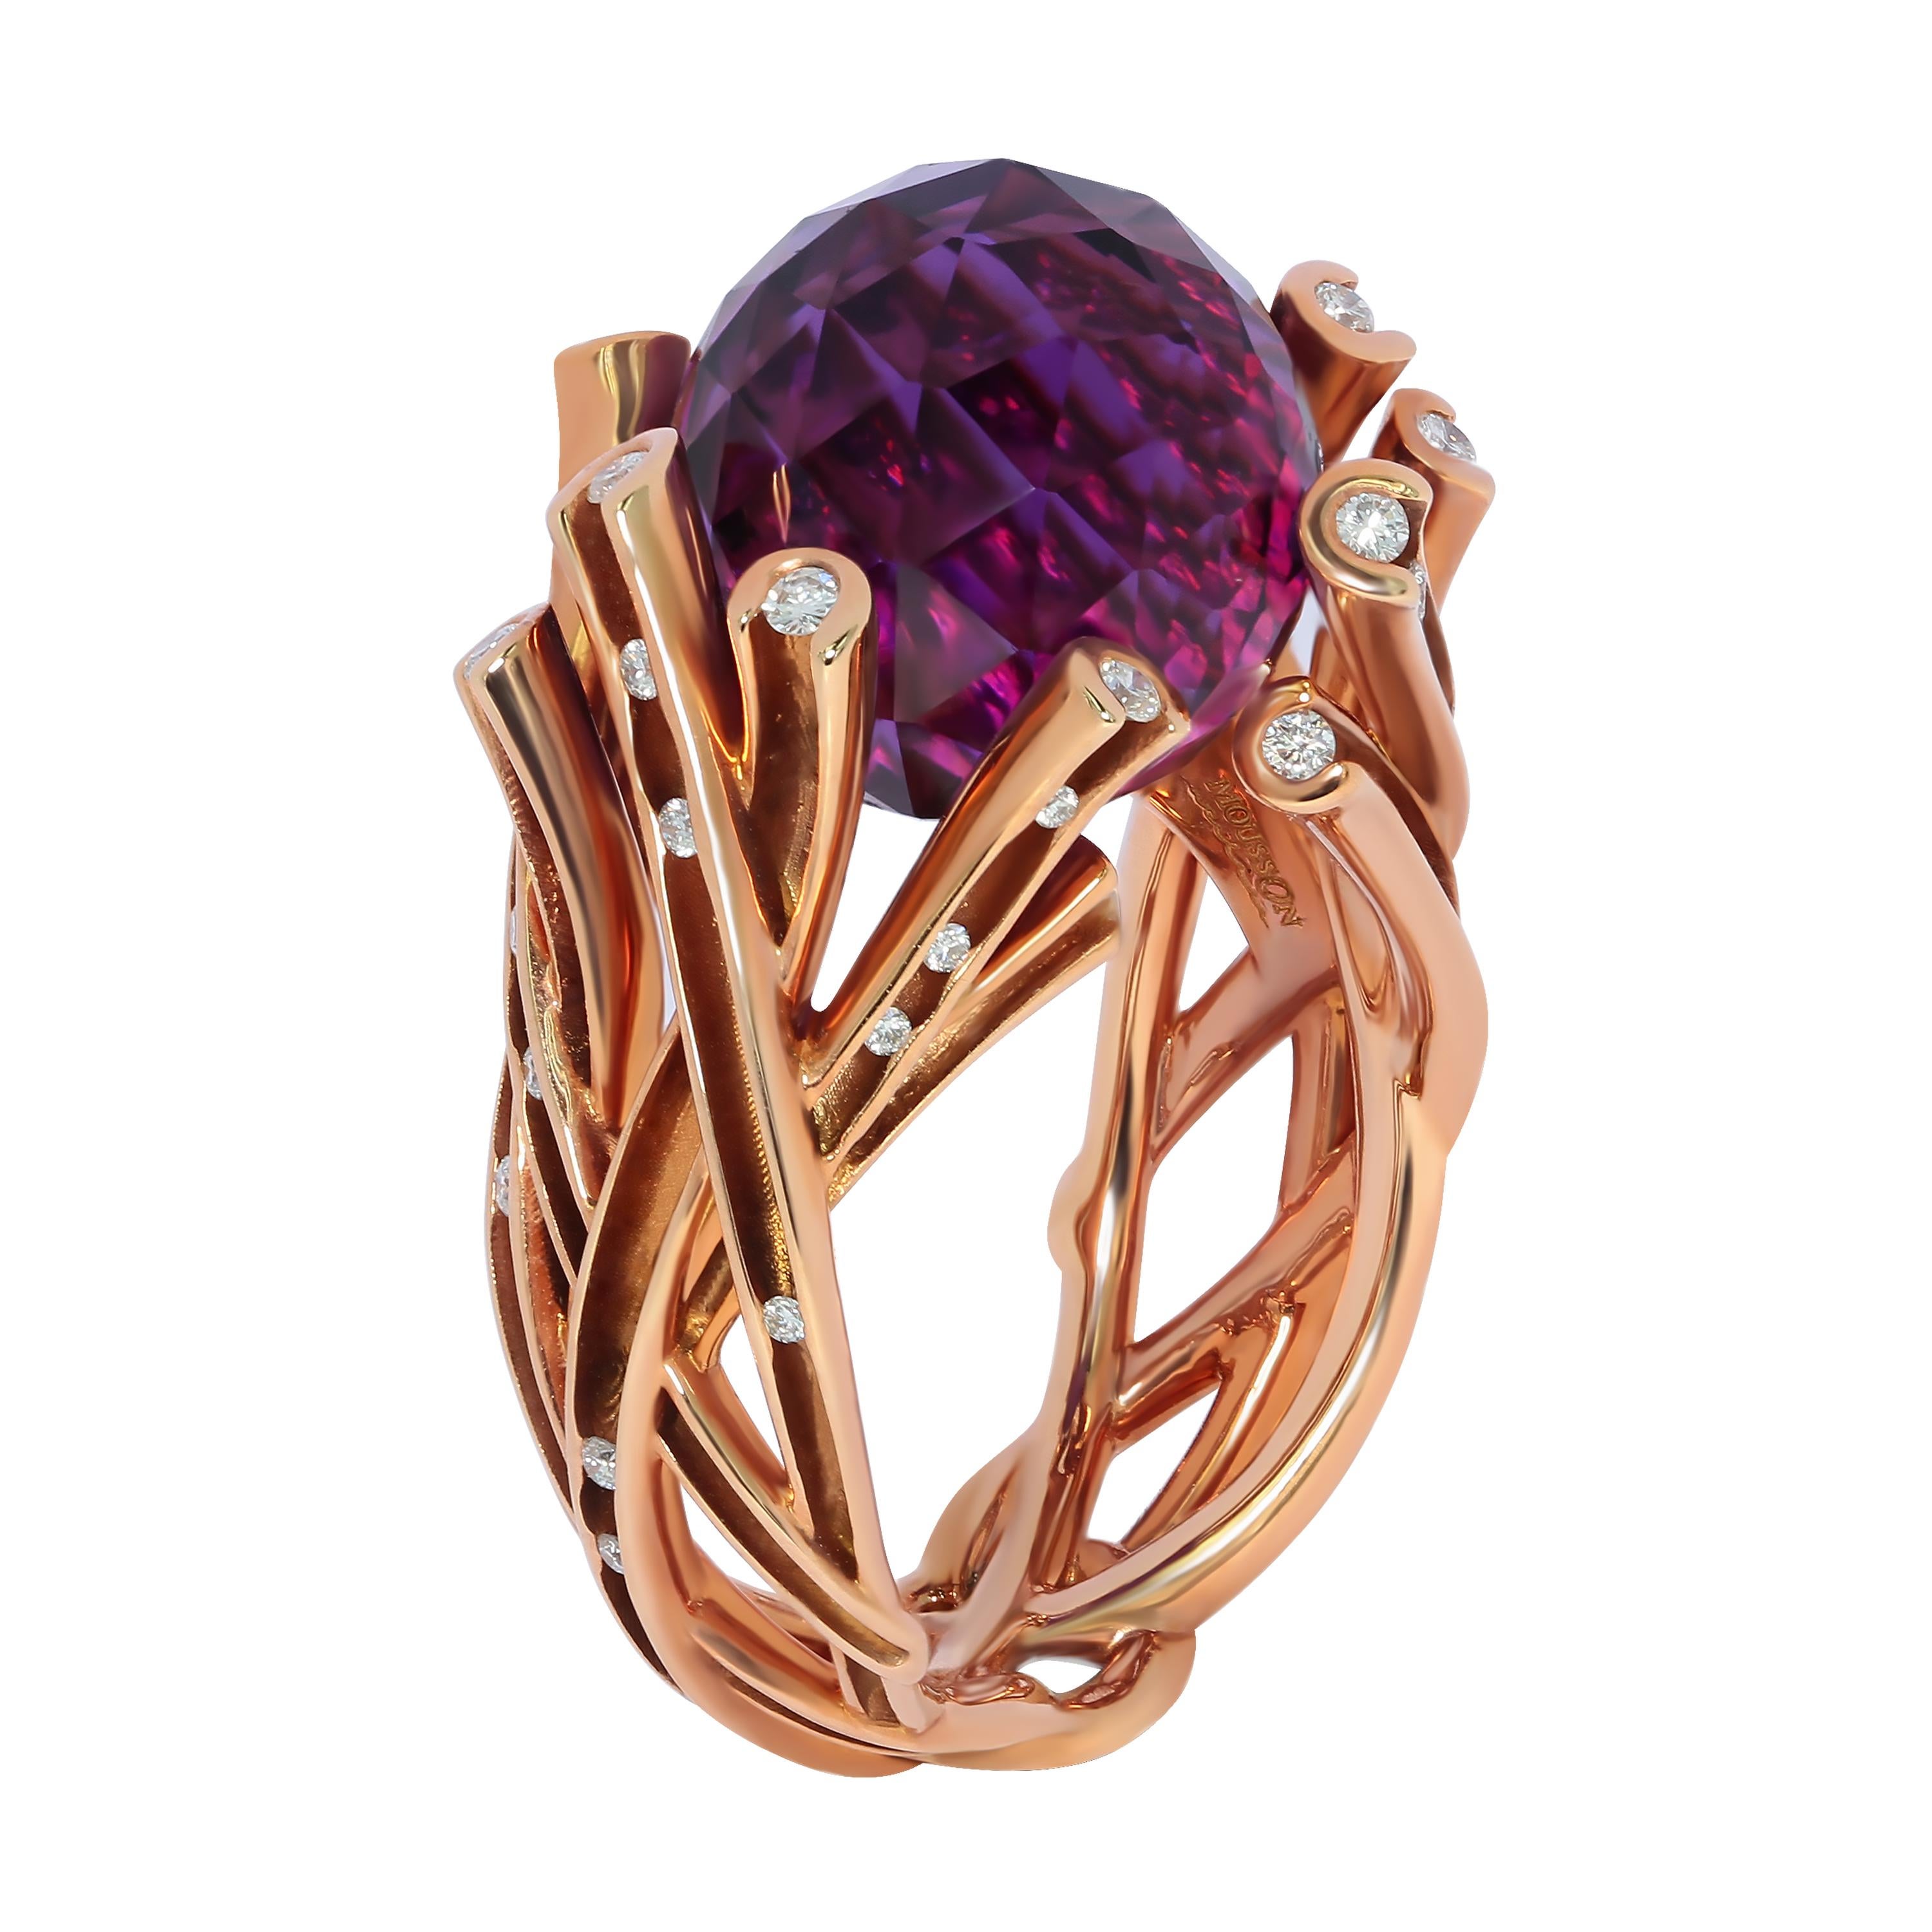 Amethyst 13.99 Carat Diamonds 18 Karat Yellow Gold Ring
Our designers draw inspiration from everywhere. Also is here. What is interesting in brushwood? And you just imagine how this 13.99 Ct Amethyst endows these dead branches with its energy and